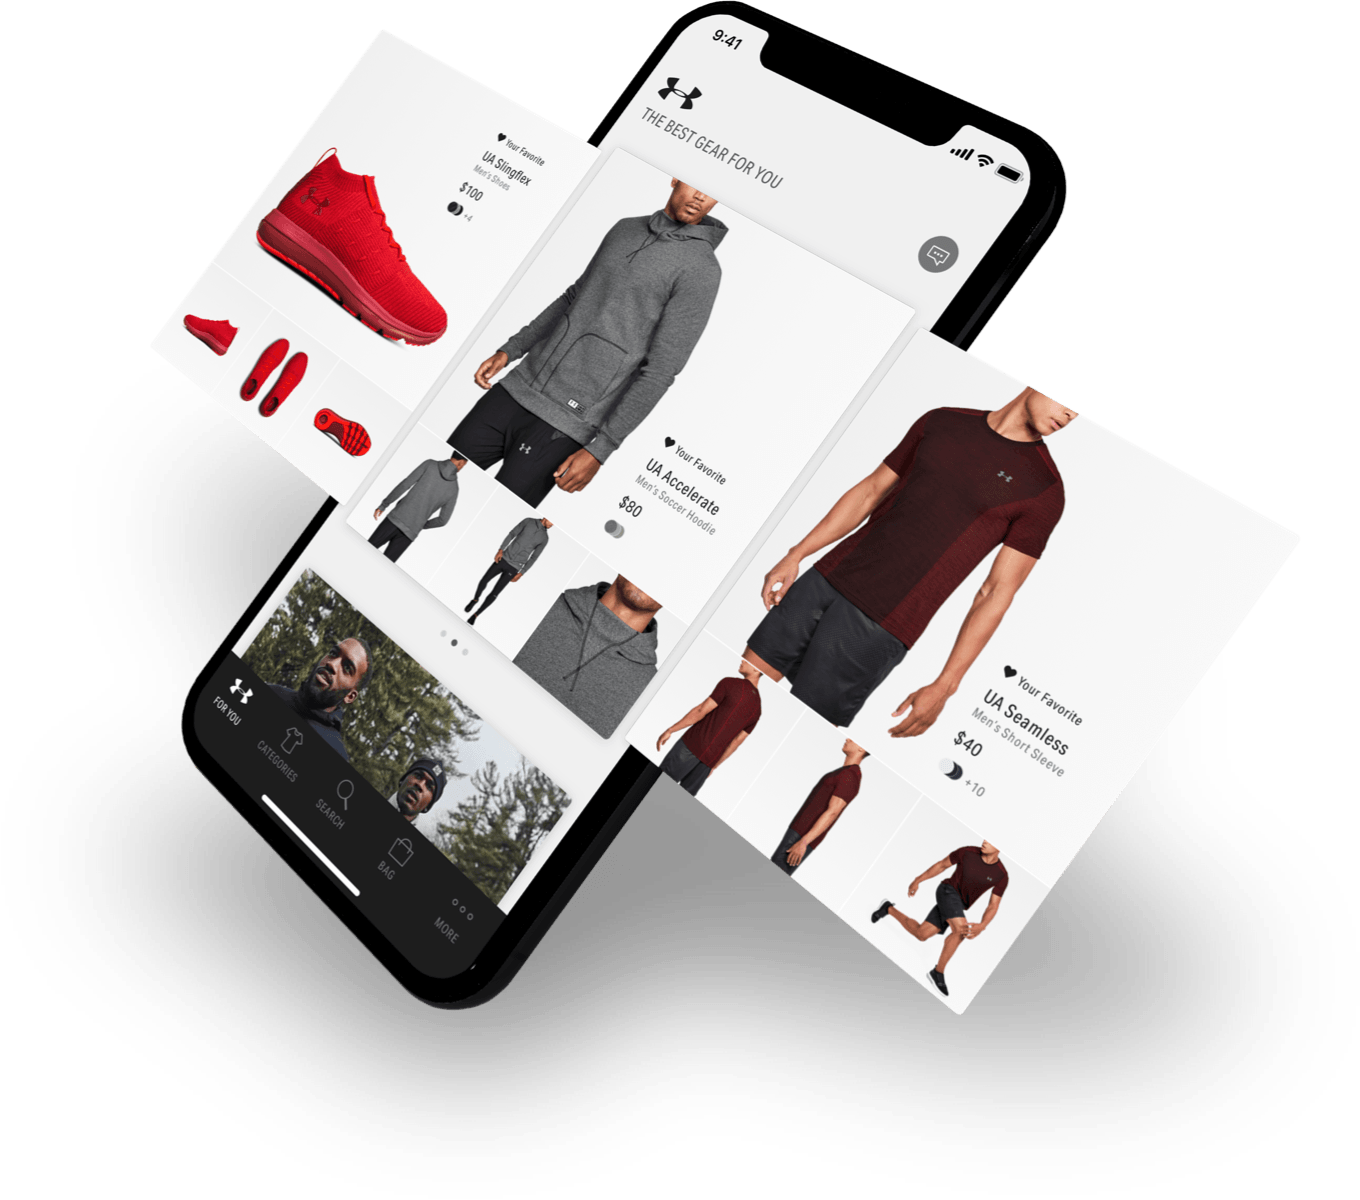 Floating iPhone mockup of the Under Armour shopping app displaying a users favorited products in a personalized content feed